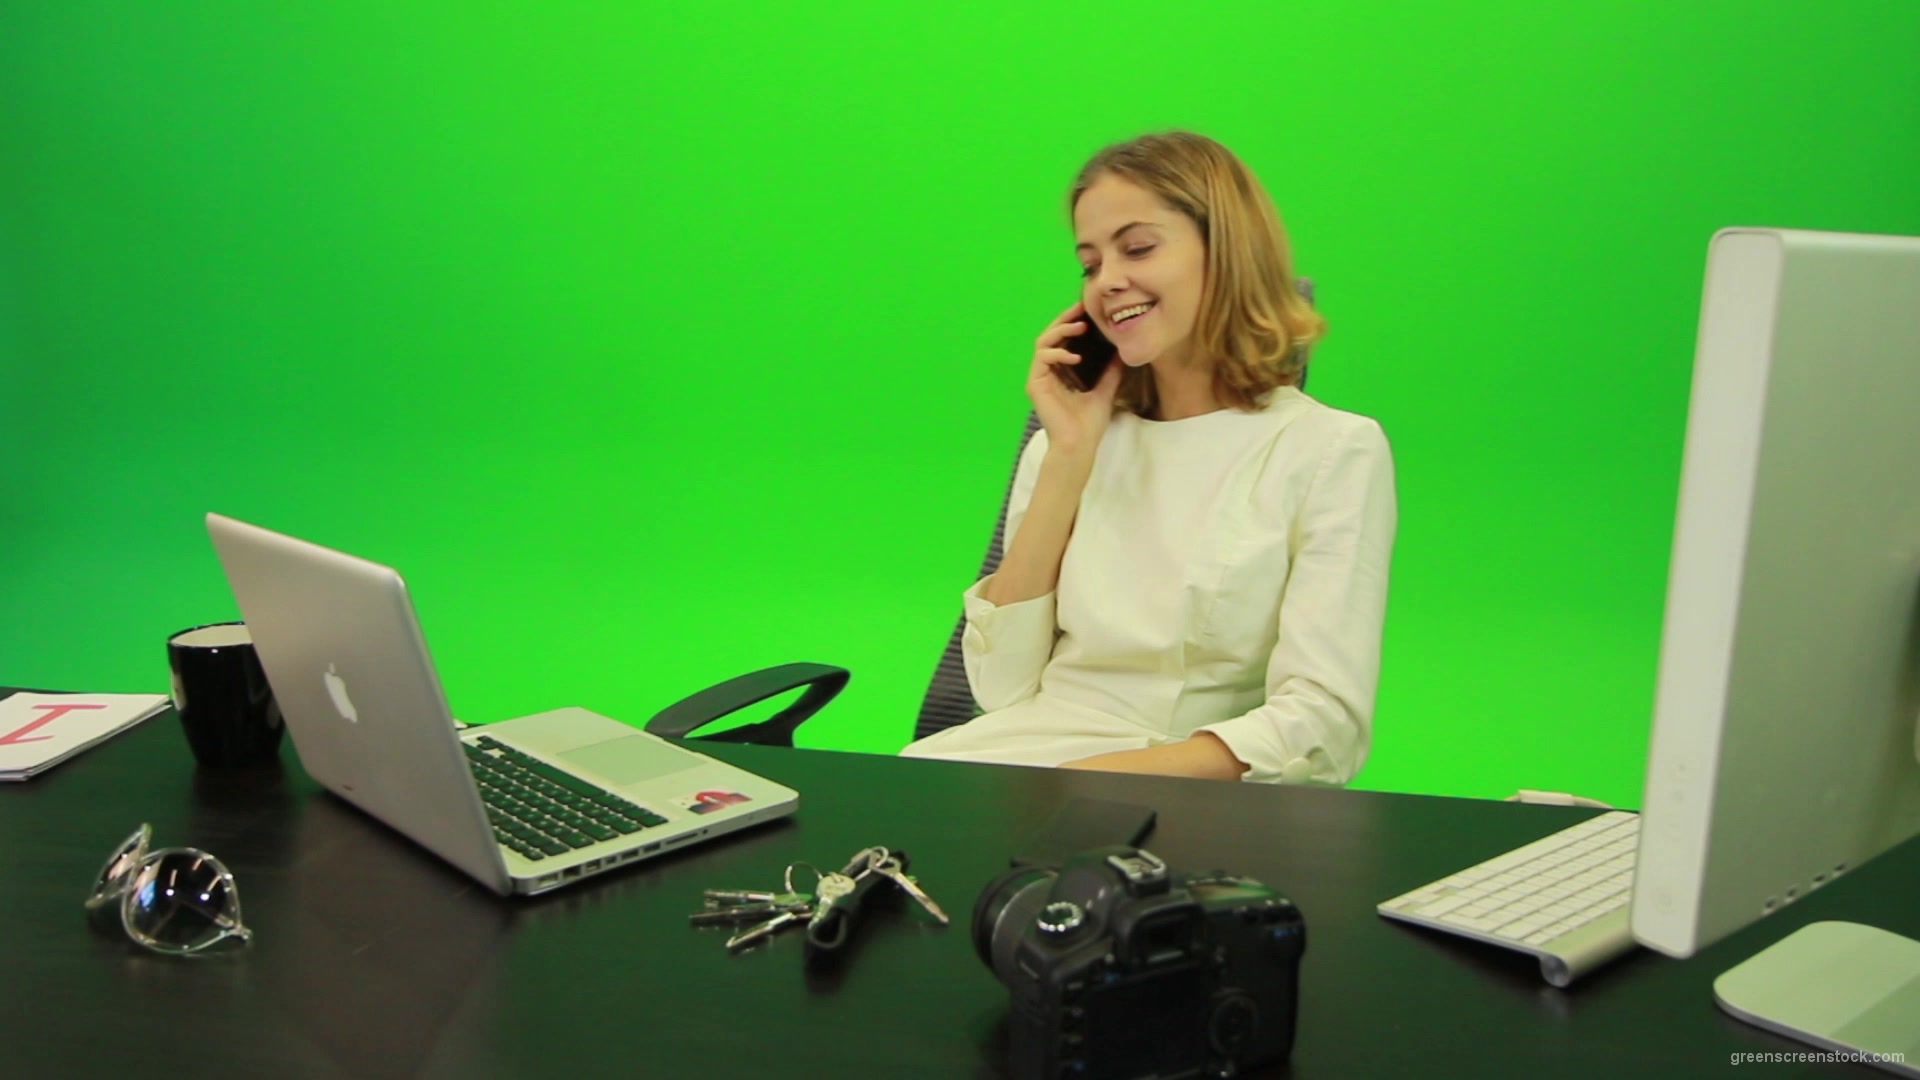 Laughing-Business-Woman-is-Talking-on-the-Phone-Green-Screen-Footage_004 Green Screen Stock